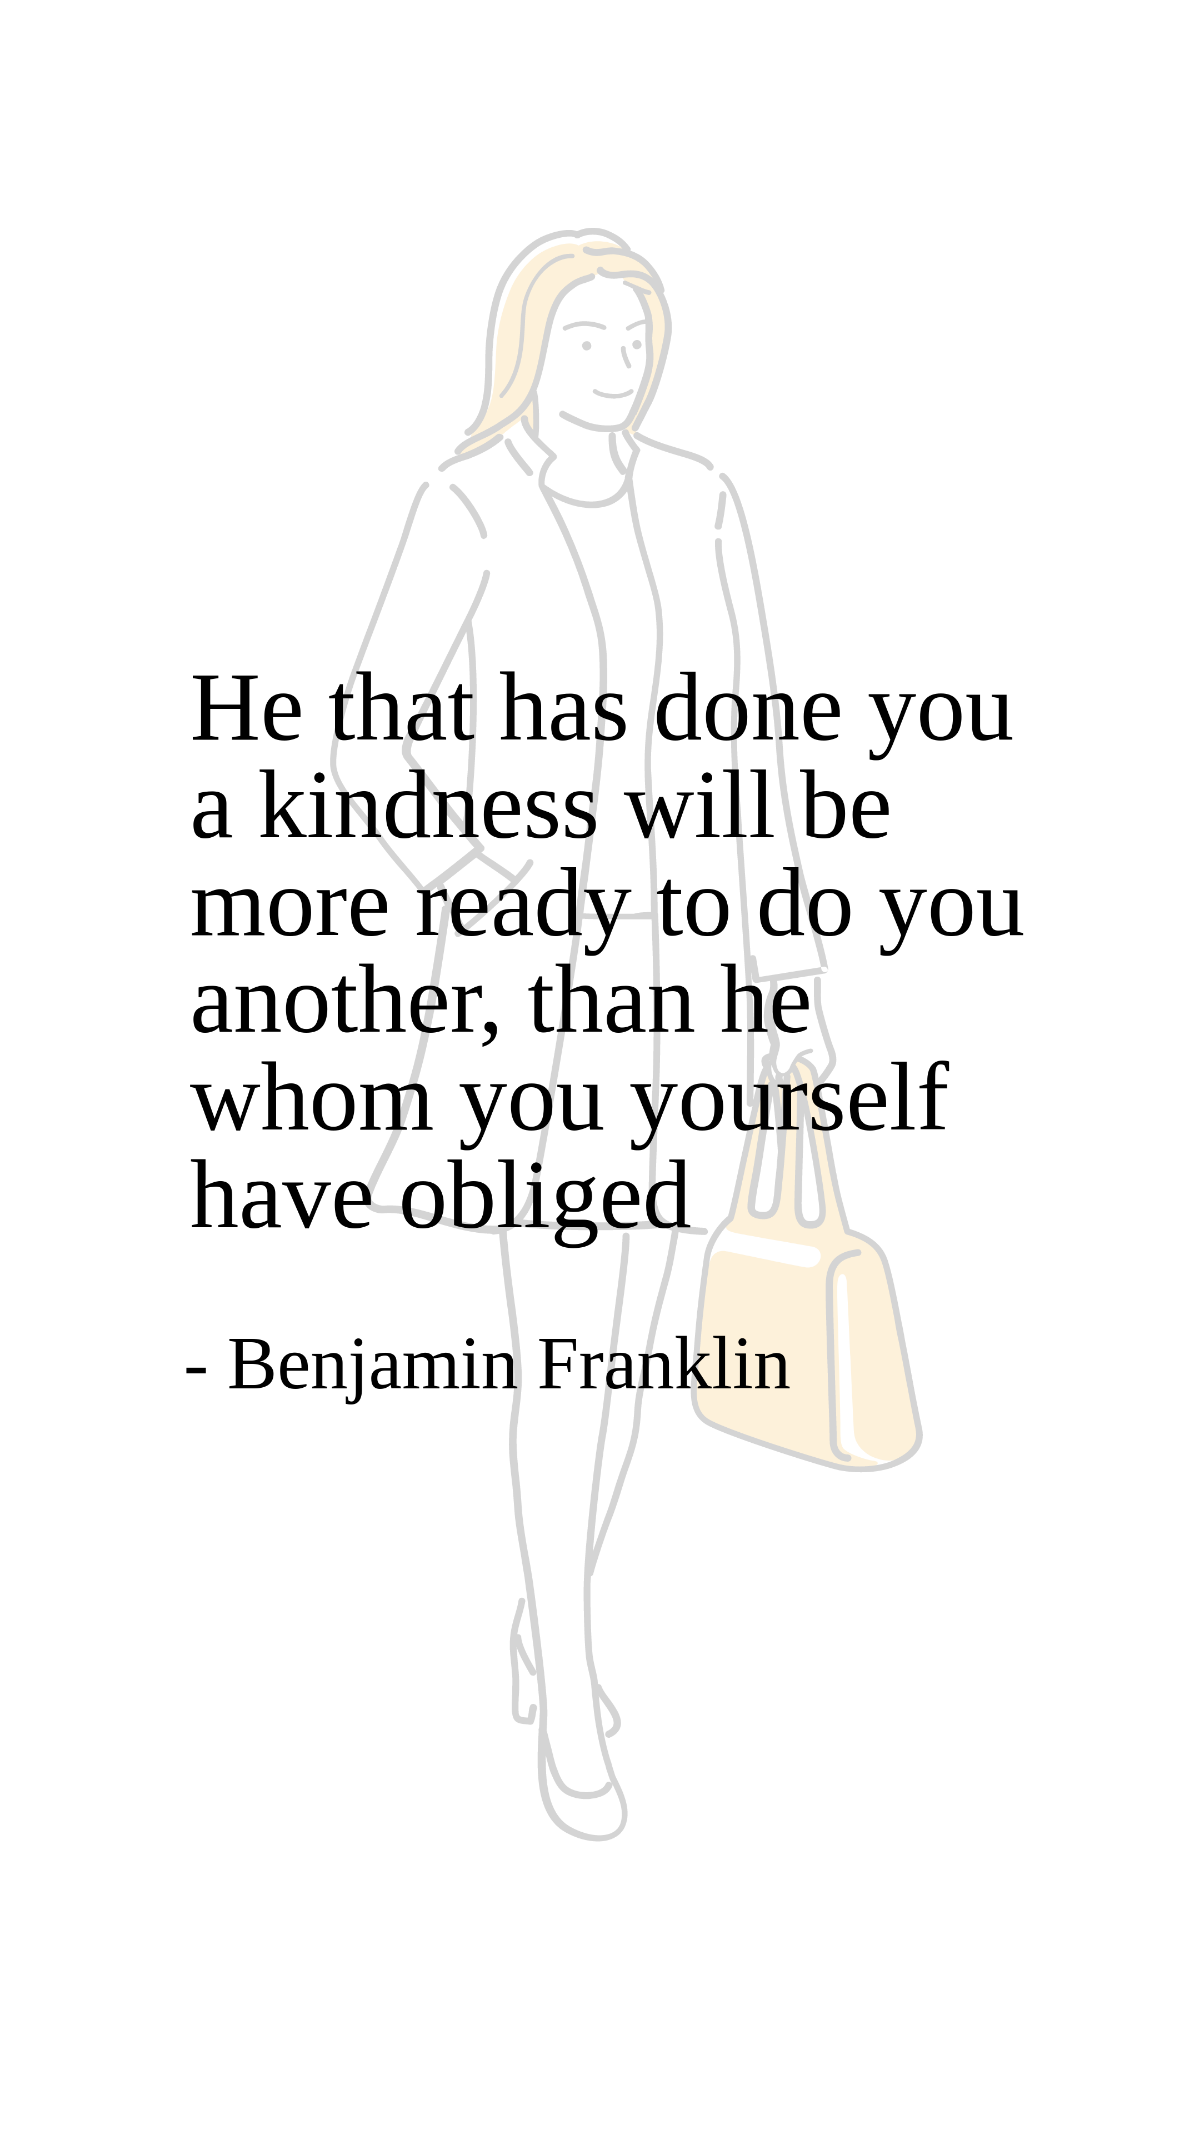 Benjamin Franklin - He that has done you a kindness will be more ready to do you another, than he whom you yourself have obliged